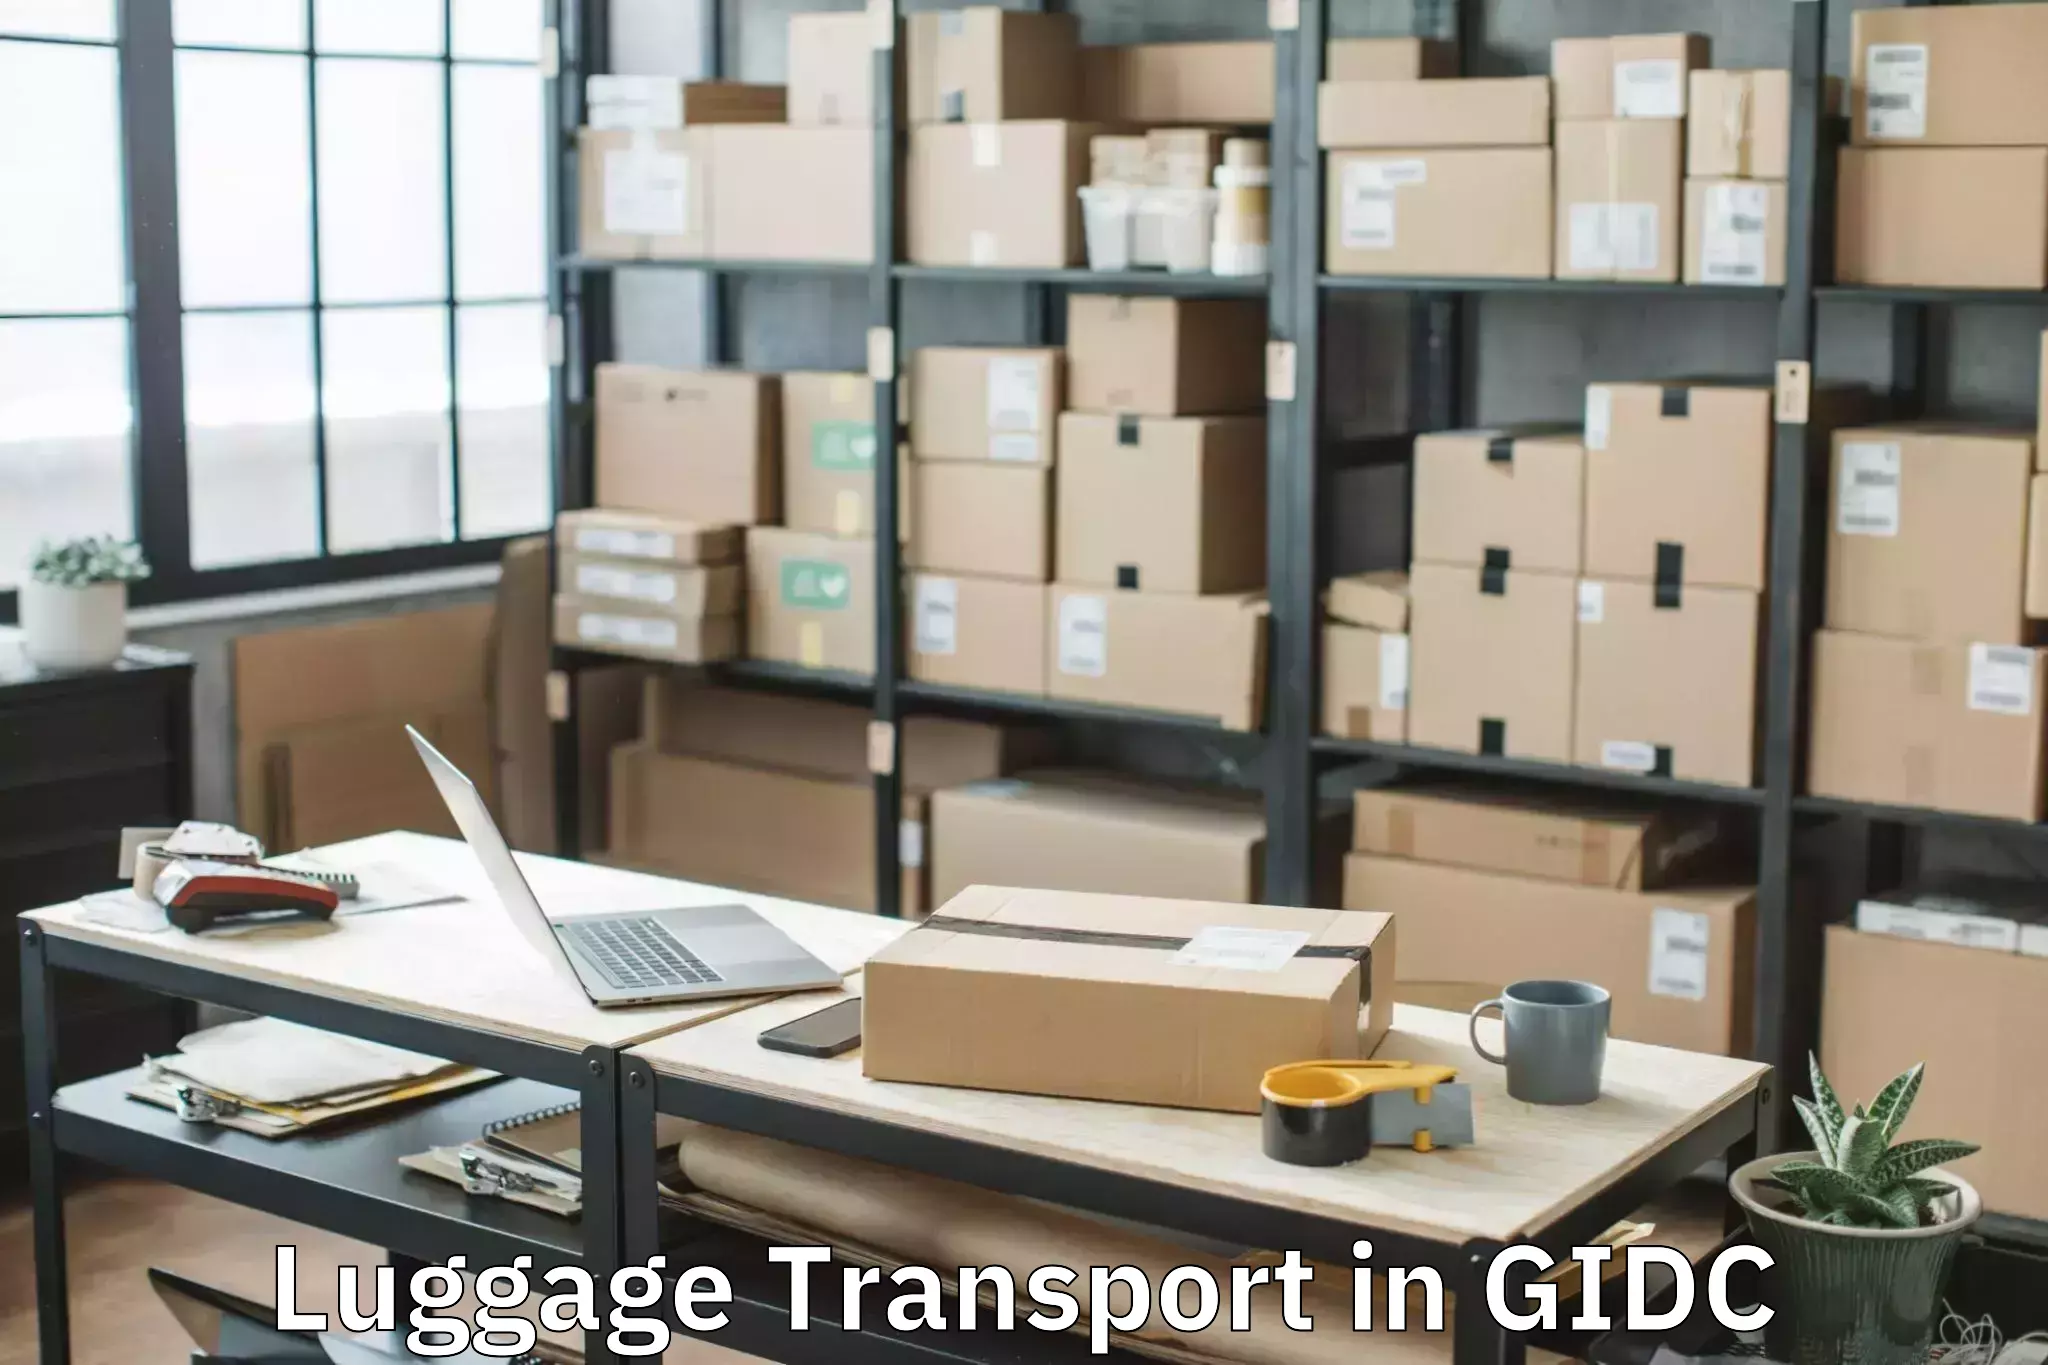 Luggage transport consultancy in GIDC